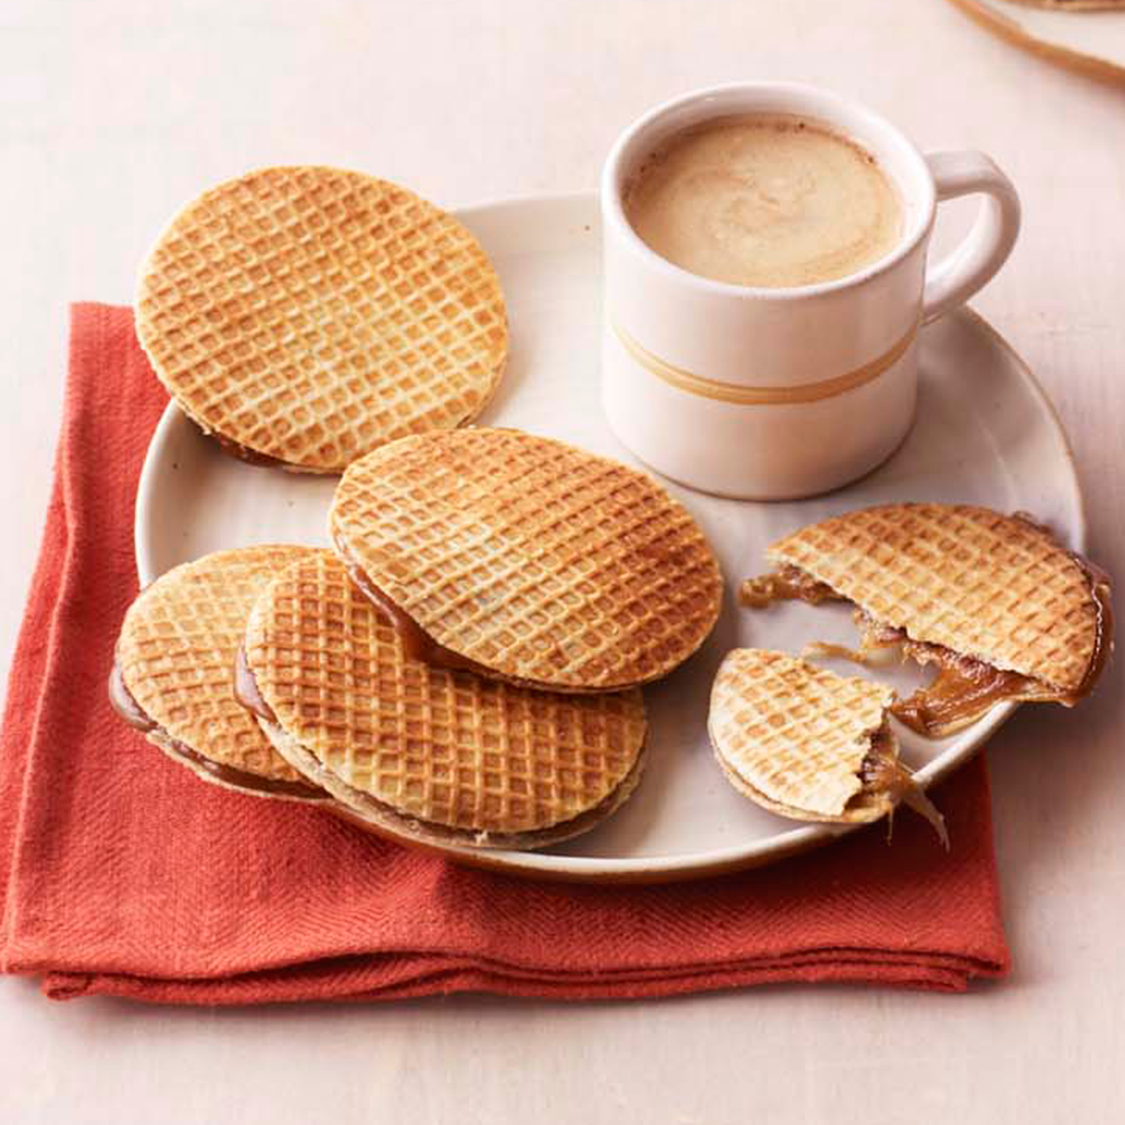 Prue Leith’s Stroopwafels - The Great British Bake Off | The Great ...